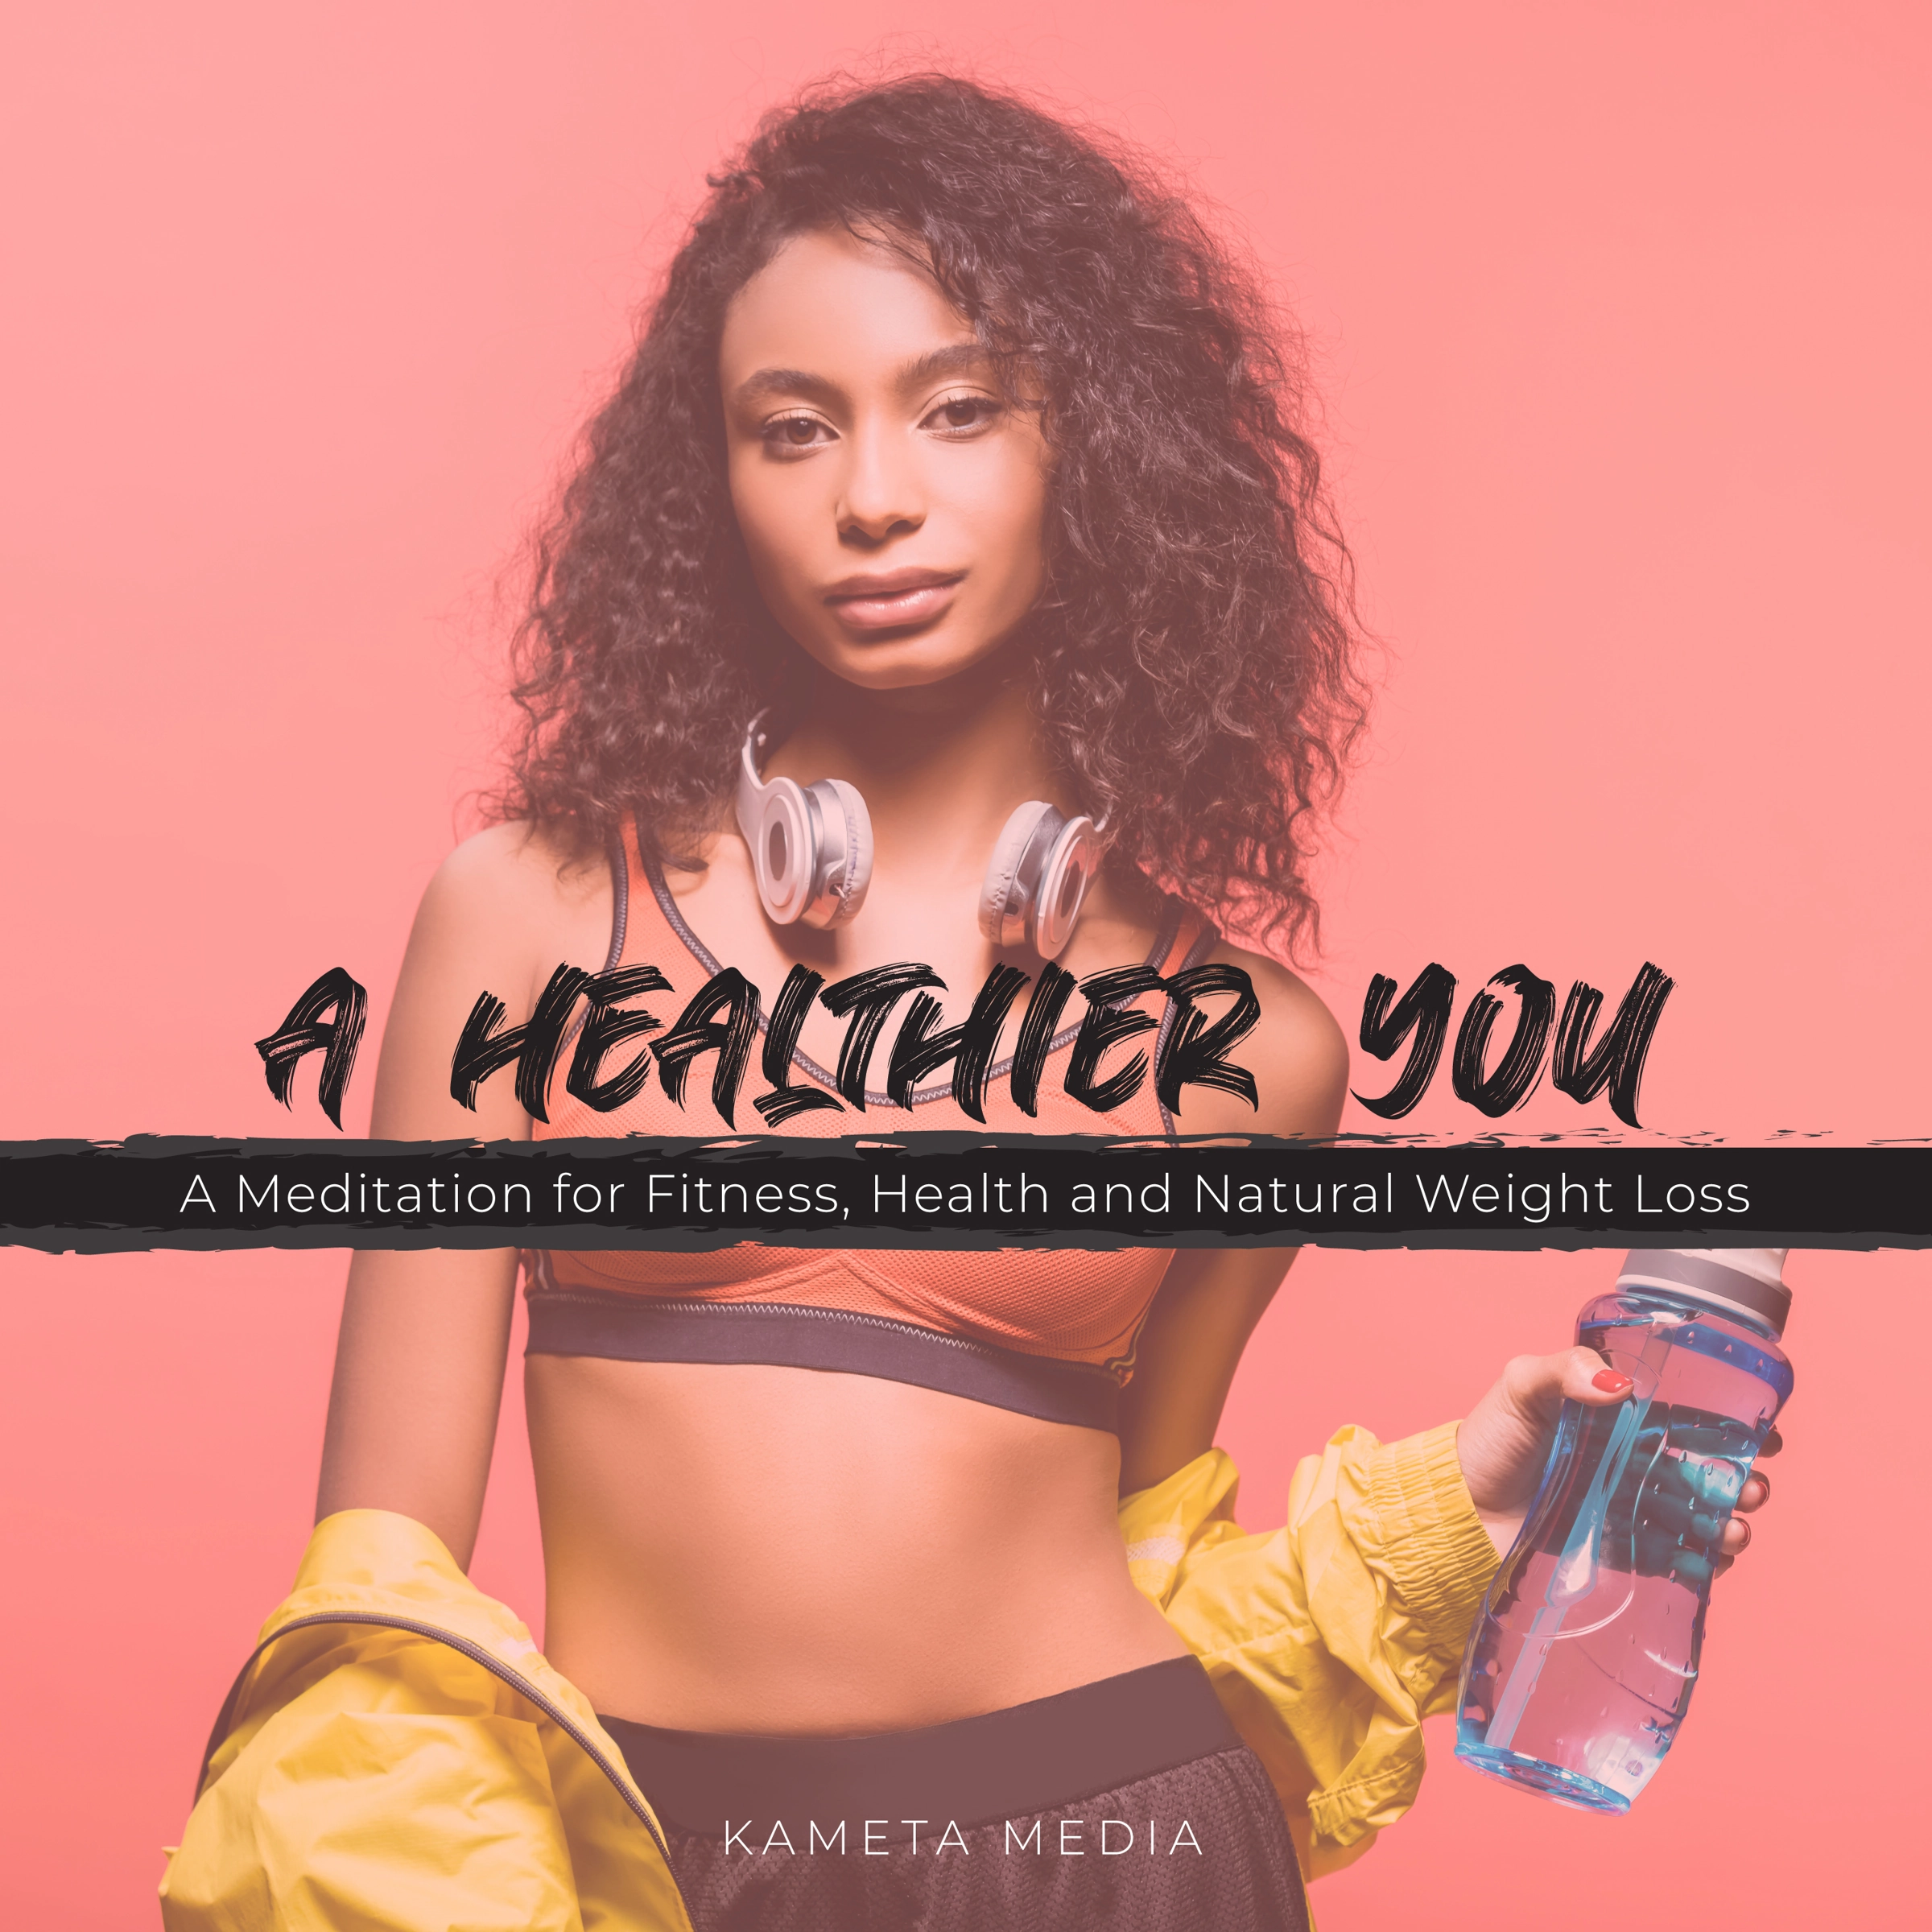 A Healthier You: A Meditation for Fitness, Health and Natural Weight Loss Audiobook by Kameta Media